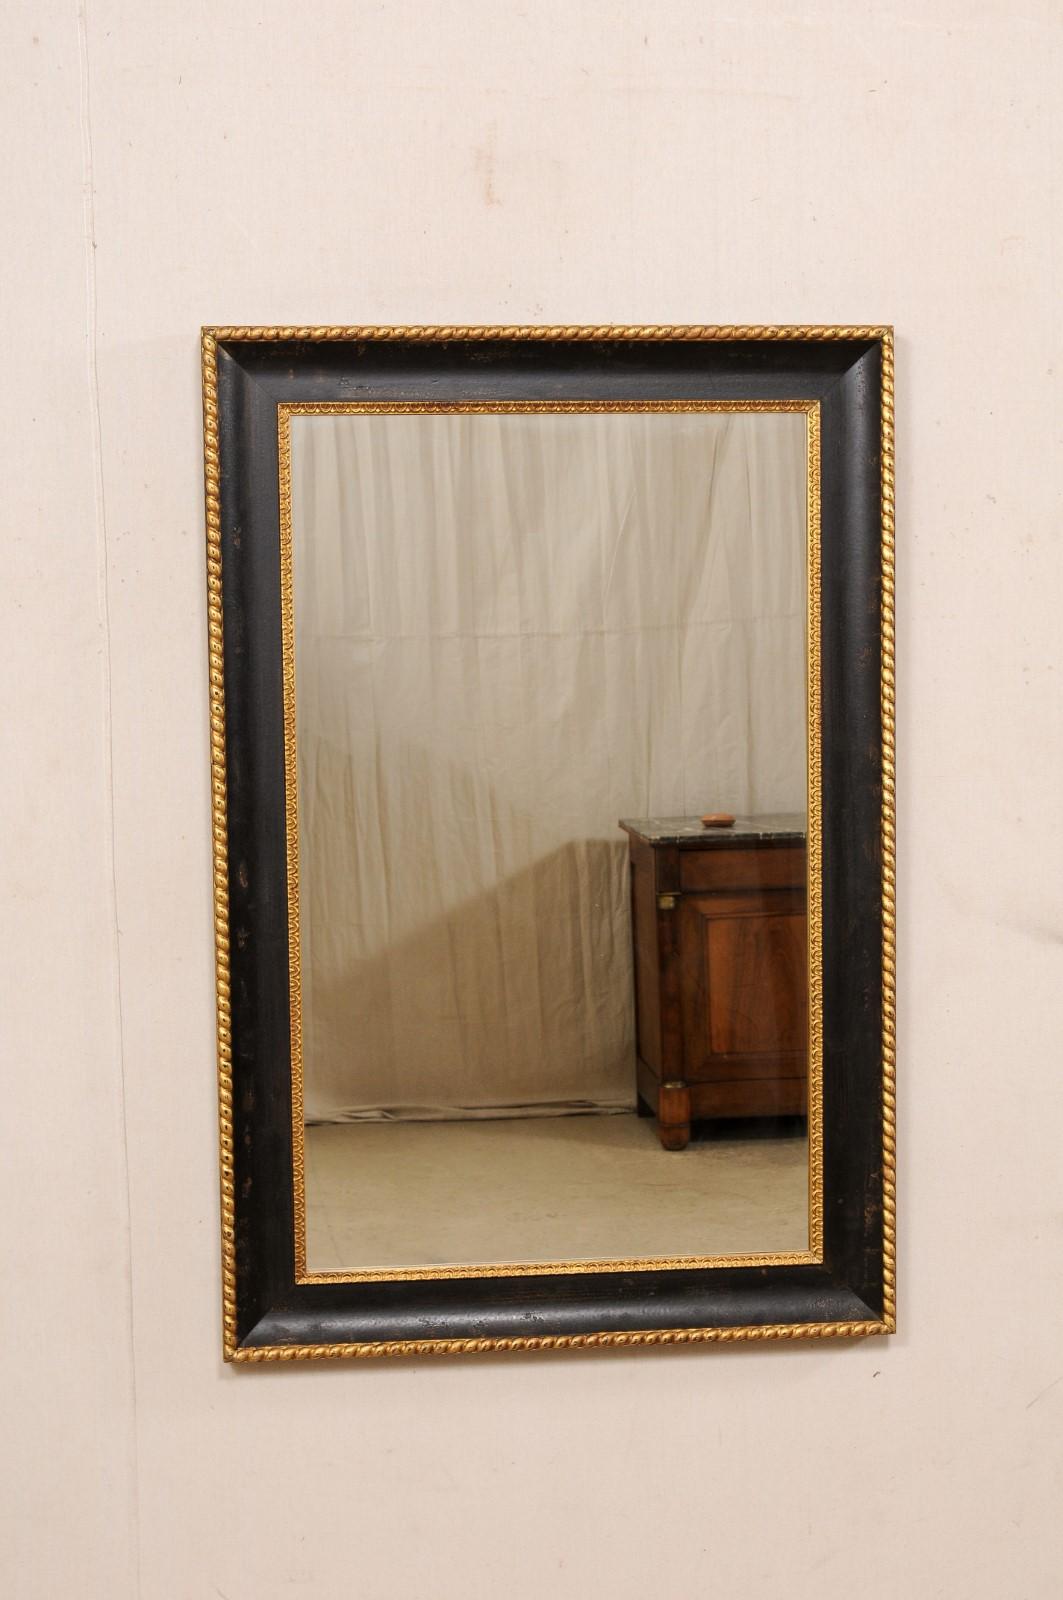 A vintage American carved and painted wood mirror. This rectangular-shaped mirror has a black wood frame, which has been embellished with gold gilt lamb's tongue trimming about the inner surround (next to the glass), and a gold rope twist carved